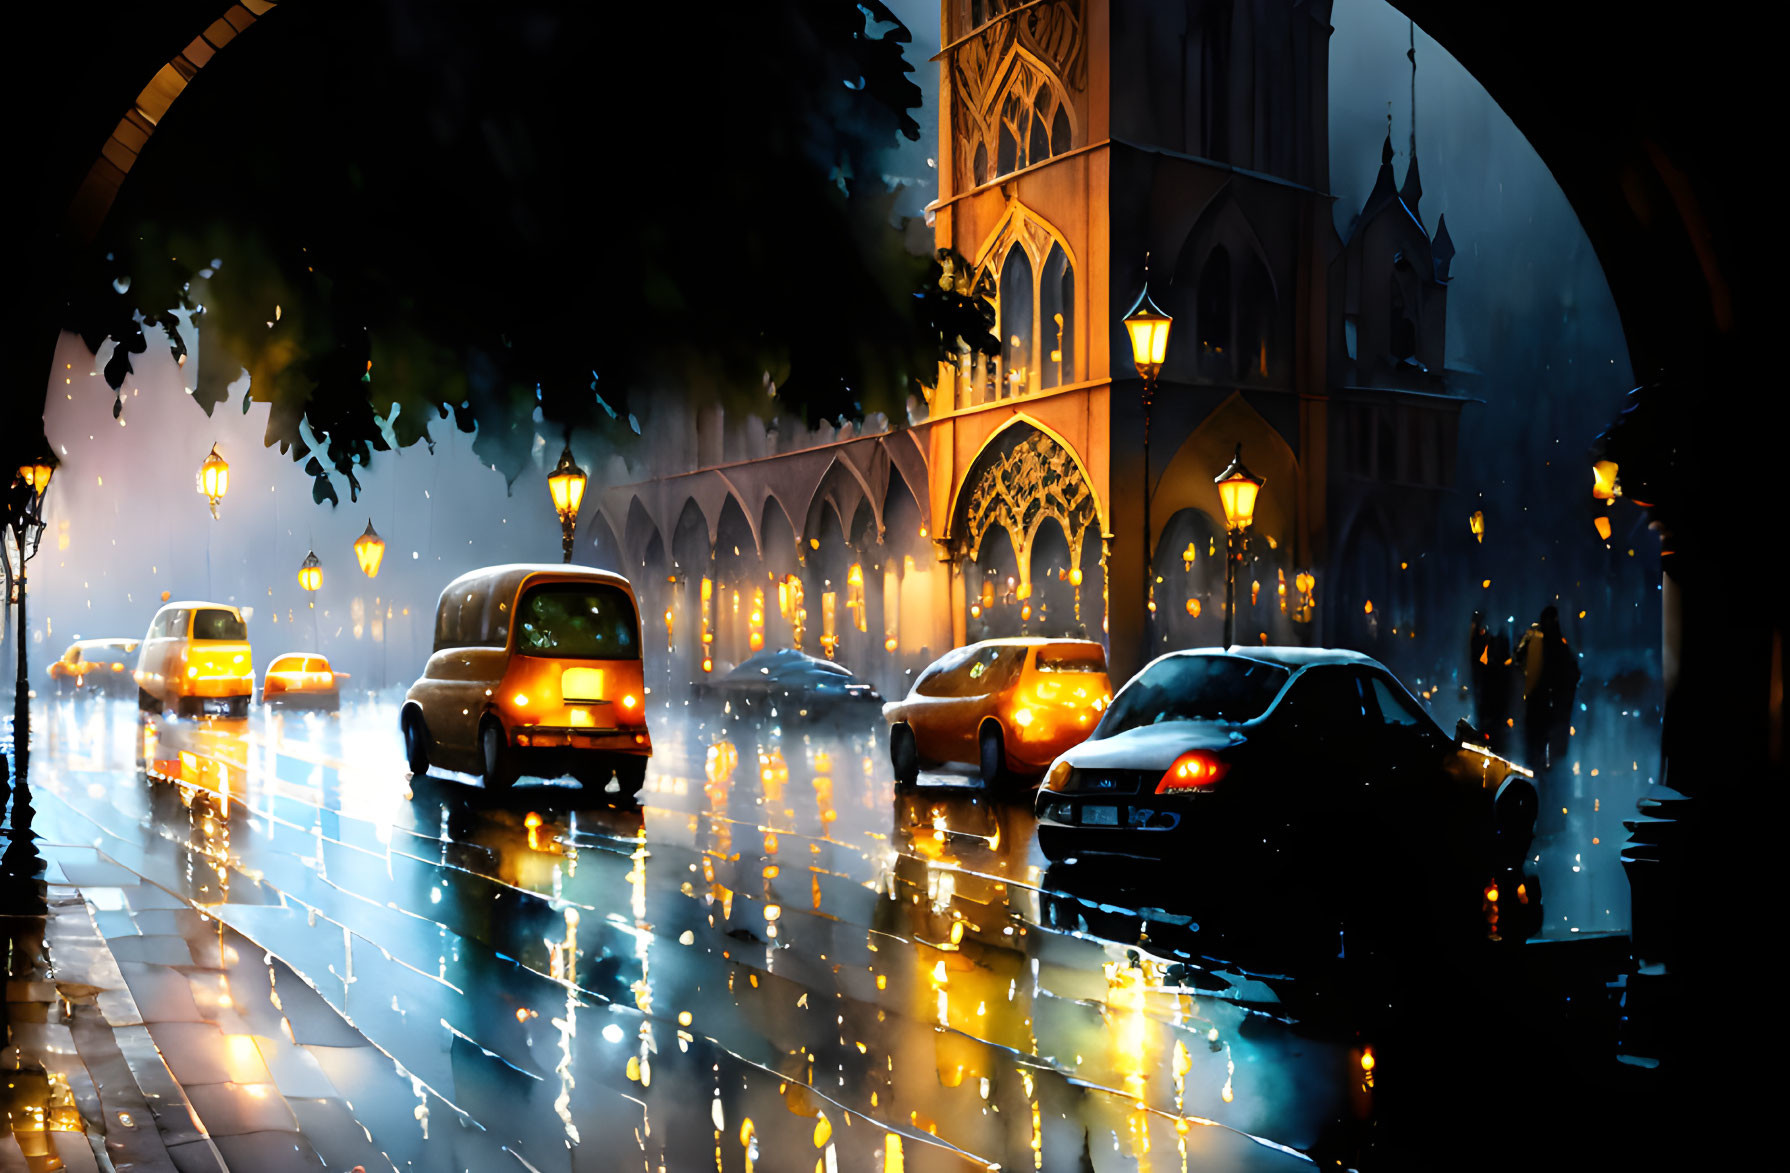 Night scene of rain-soaked street with car headlights, archway, ornate buildings, and lit